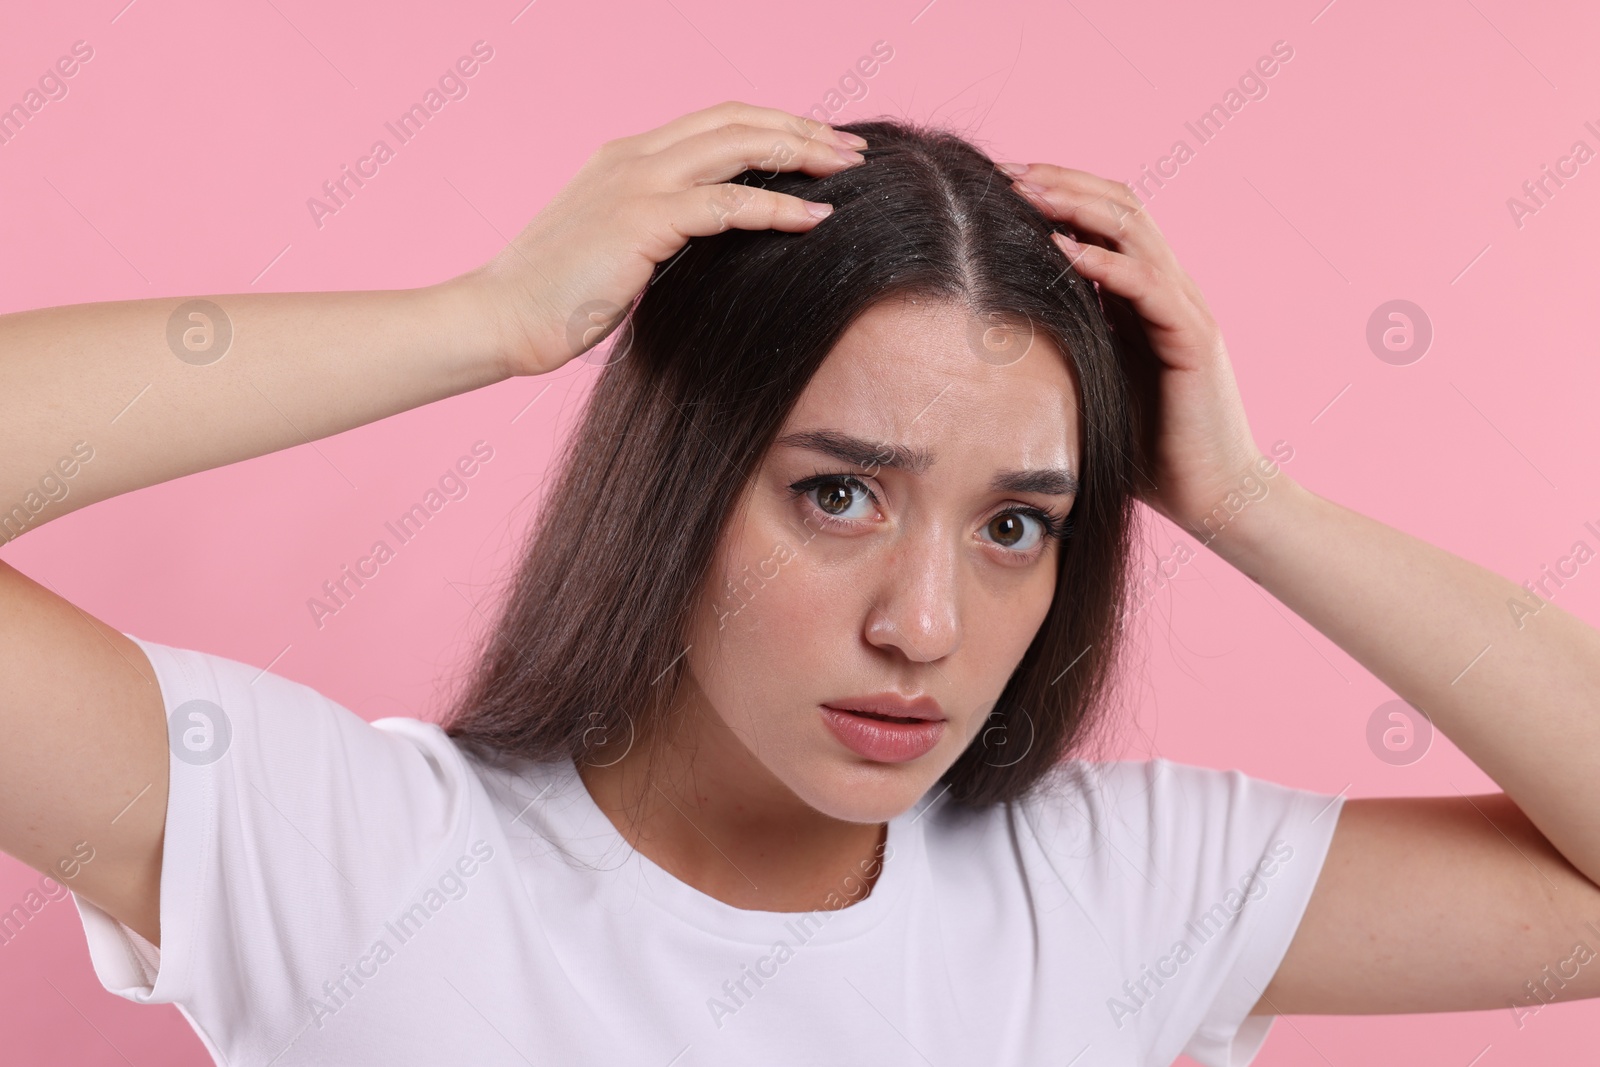 Photo of Emotional woman suffering from dandruff problem on pink background